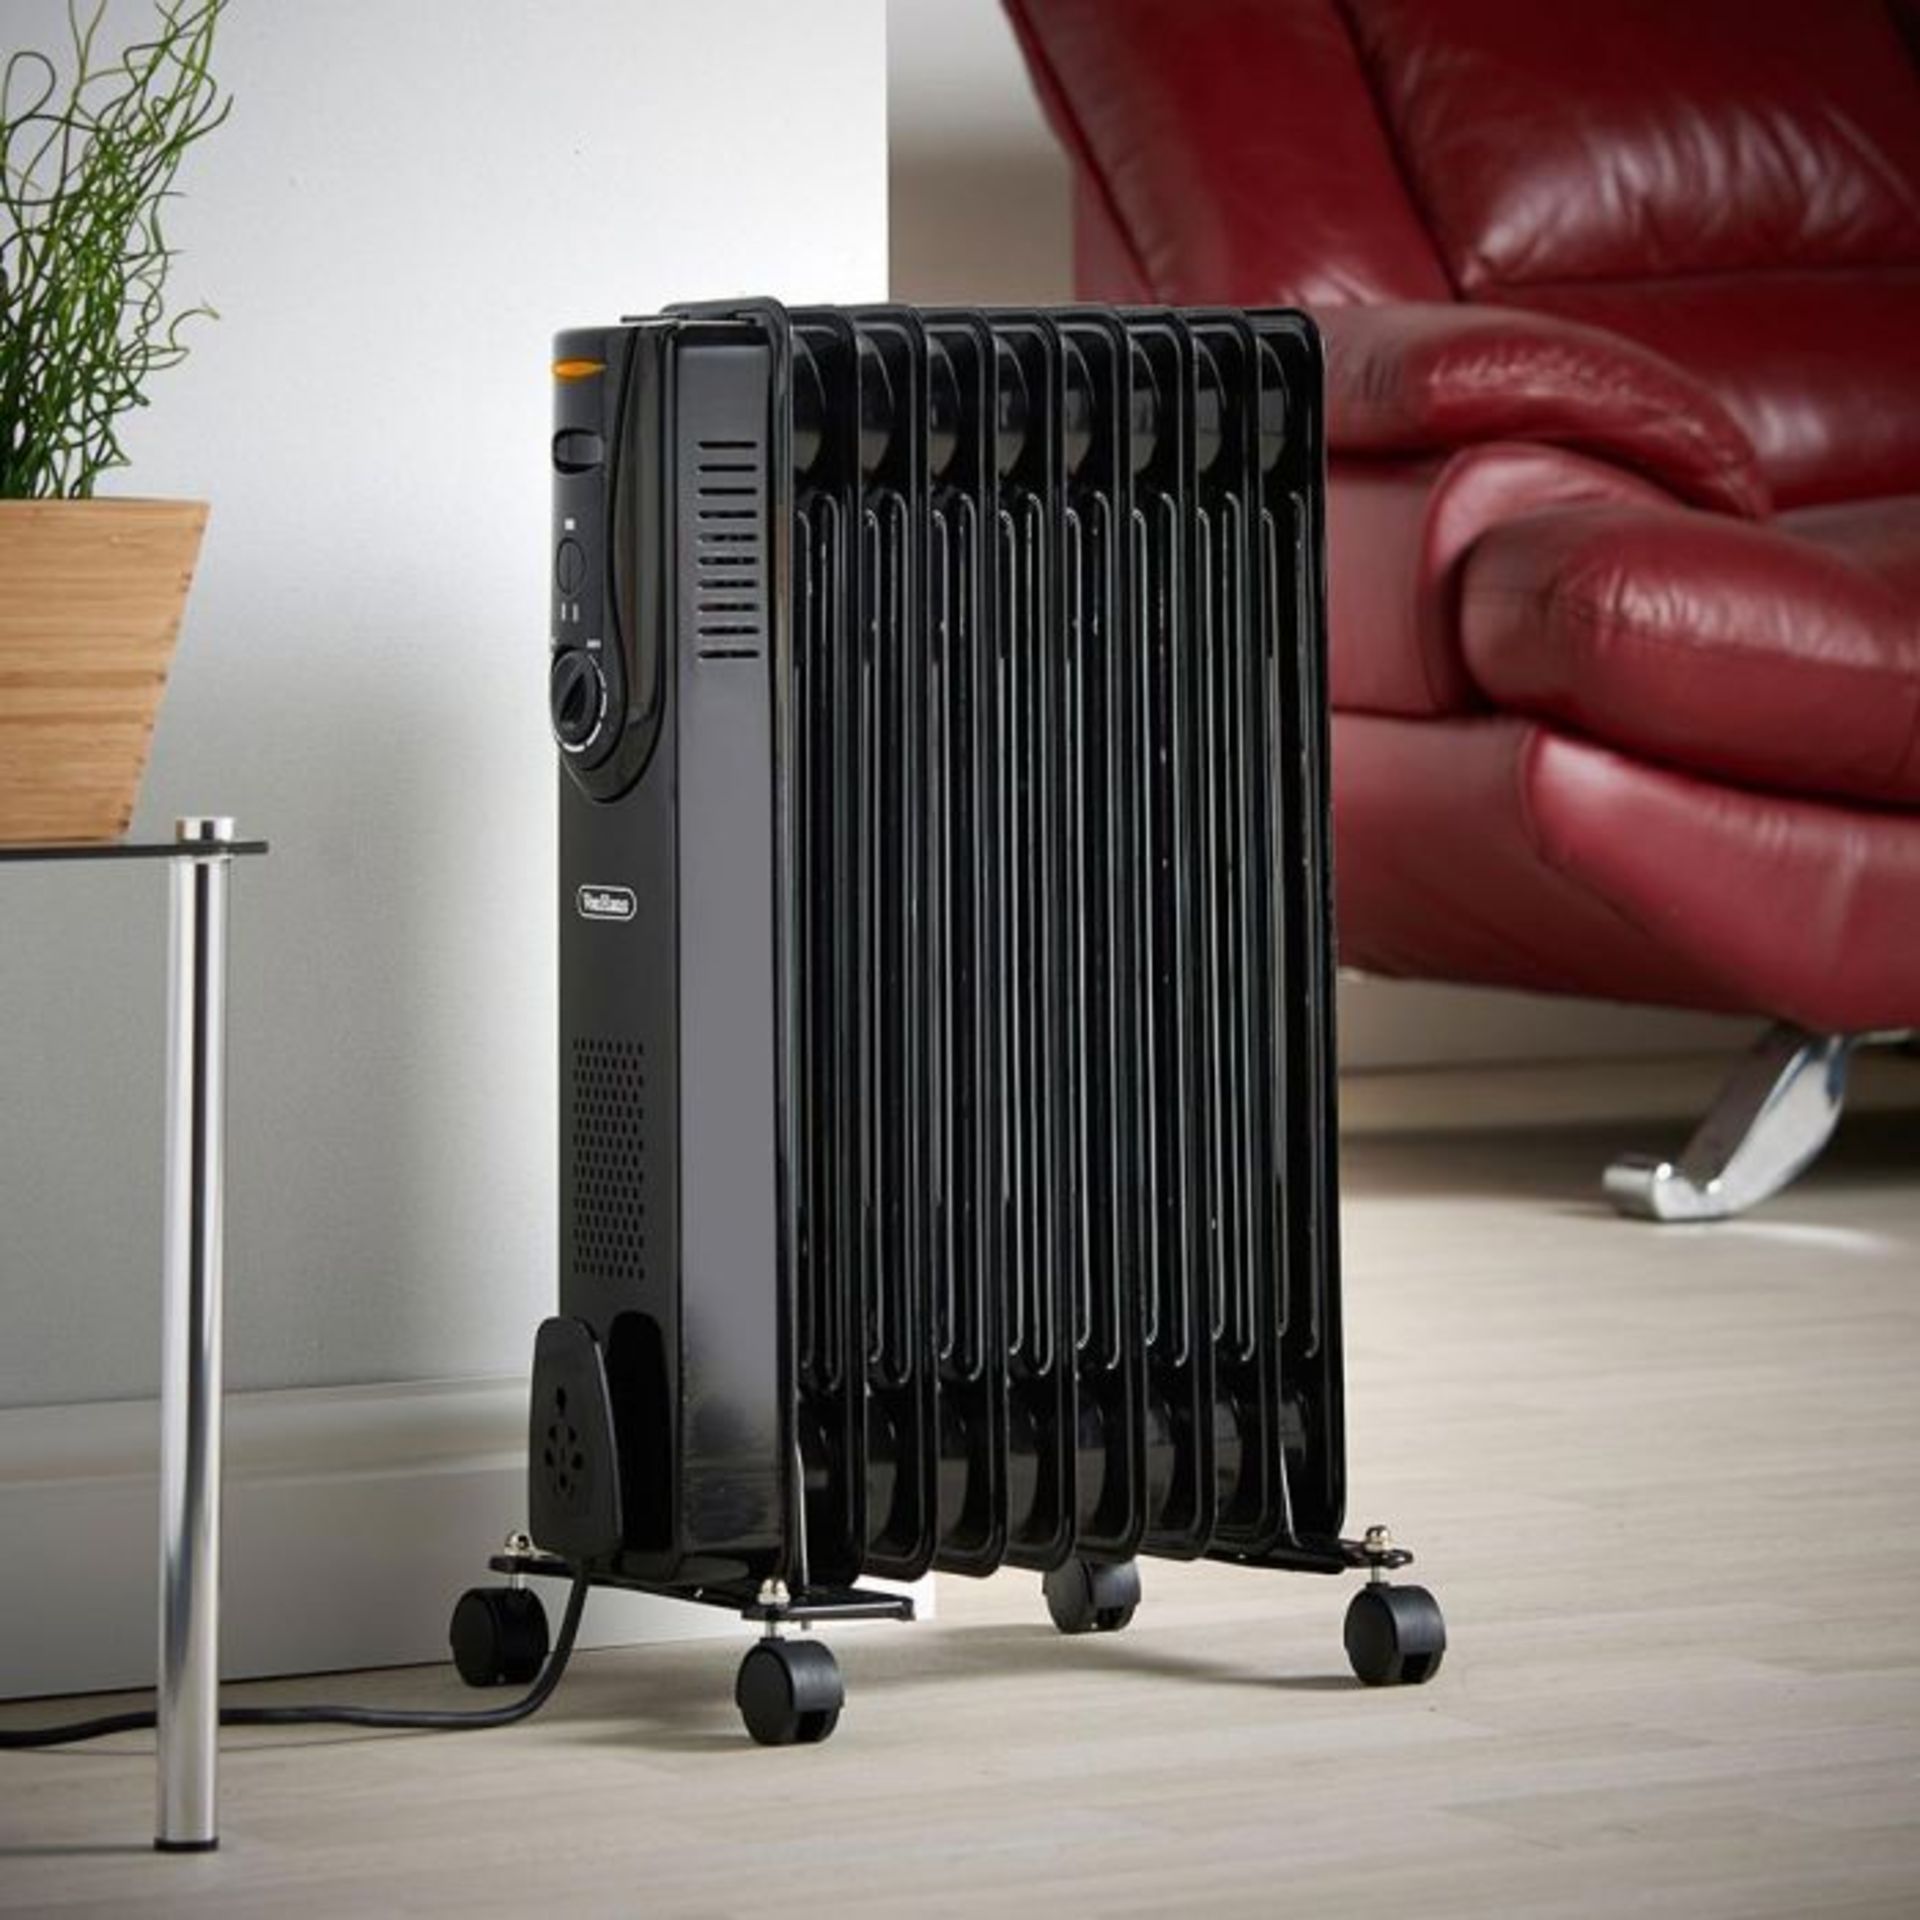 (V51) 9 Fin 2000W Oil Filled Radiator - Black Powerful 2000W radiator with 9 oil-filled fins ?...